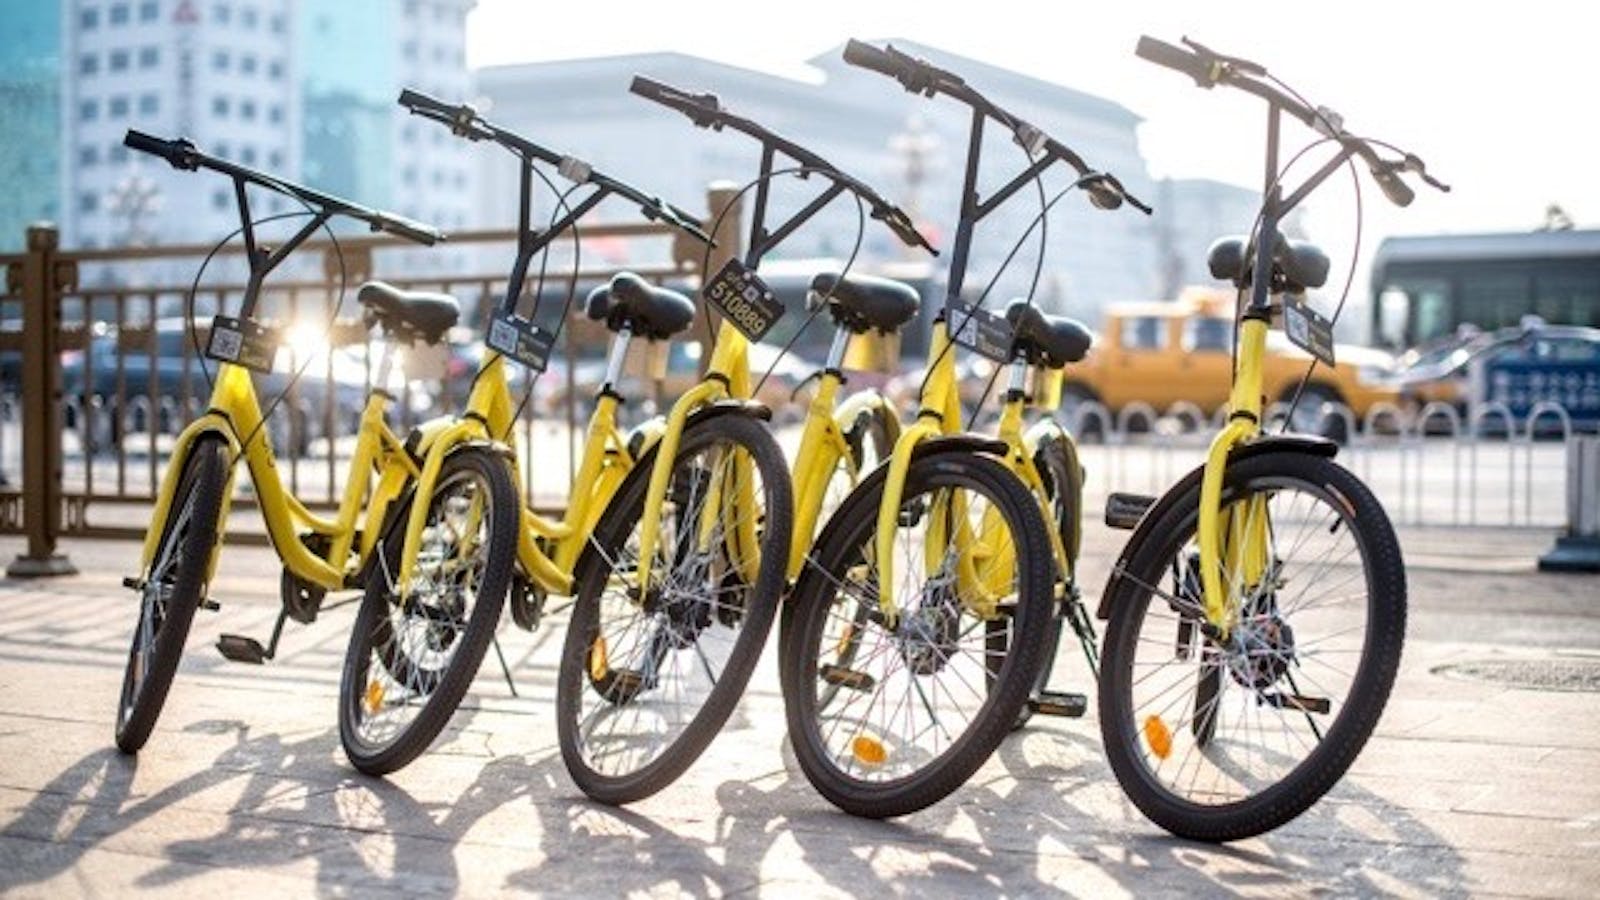 Ofo bicycles available for rent. Photo by Ofo.